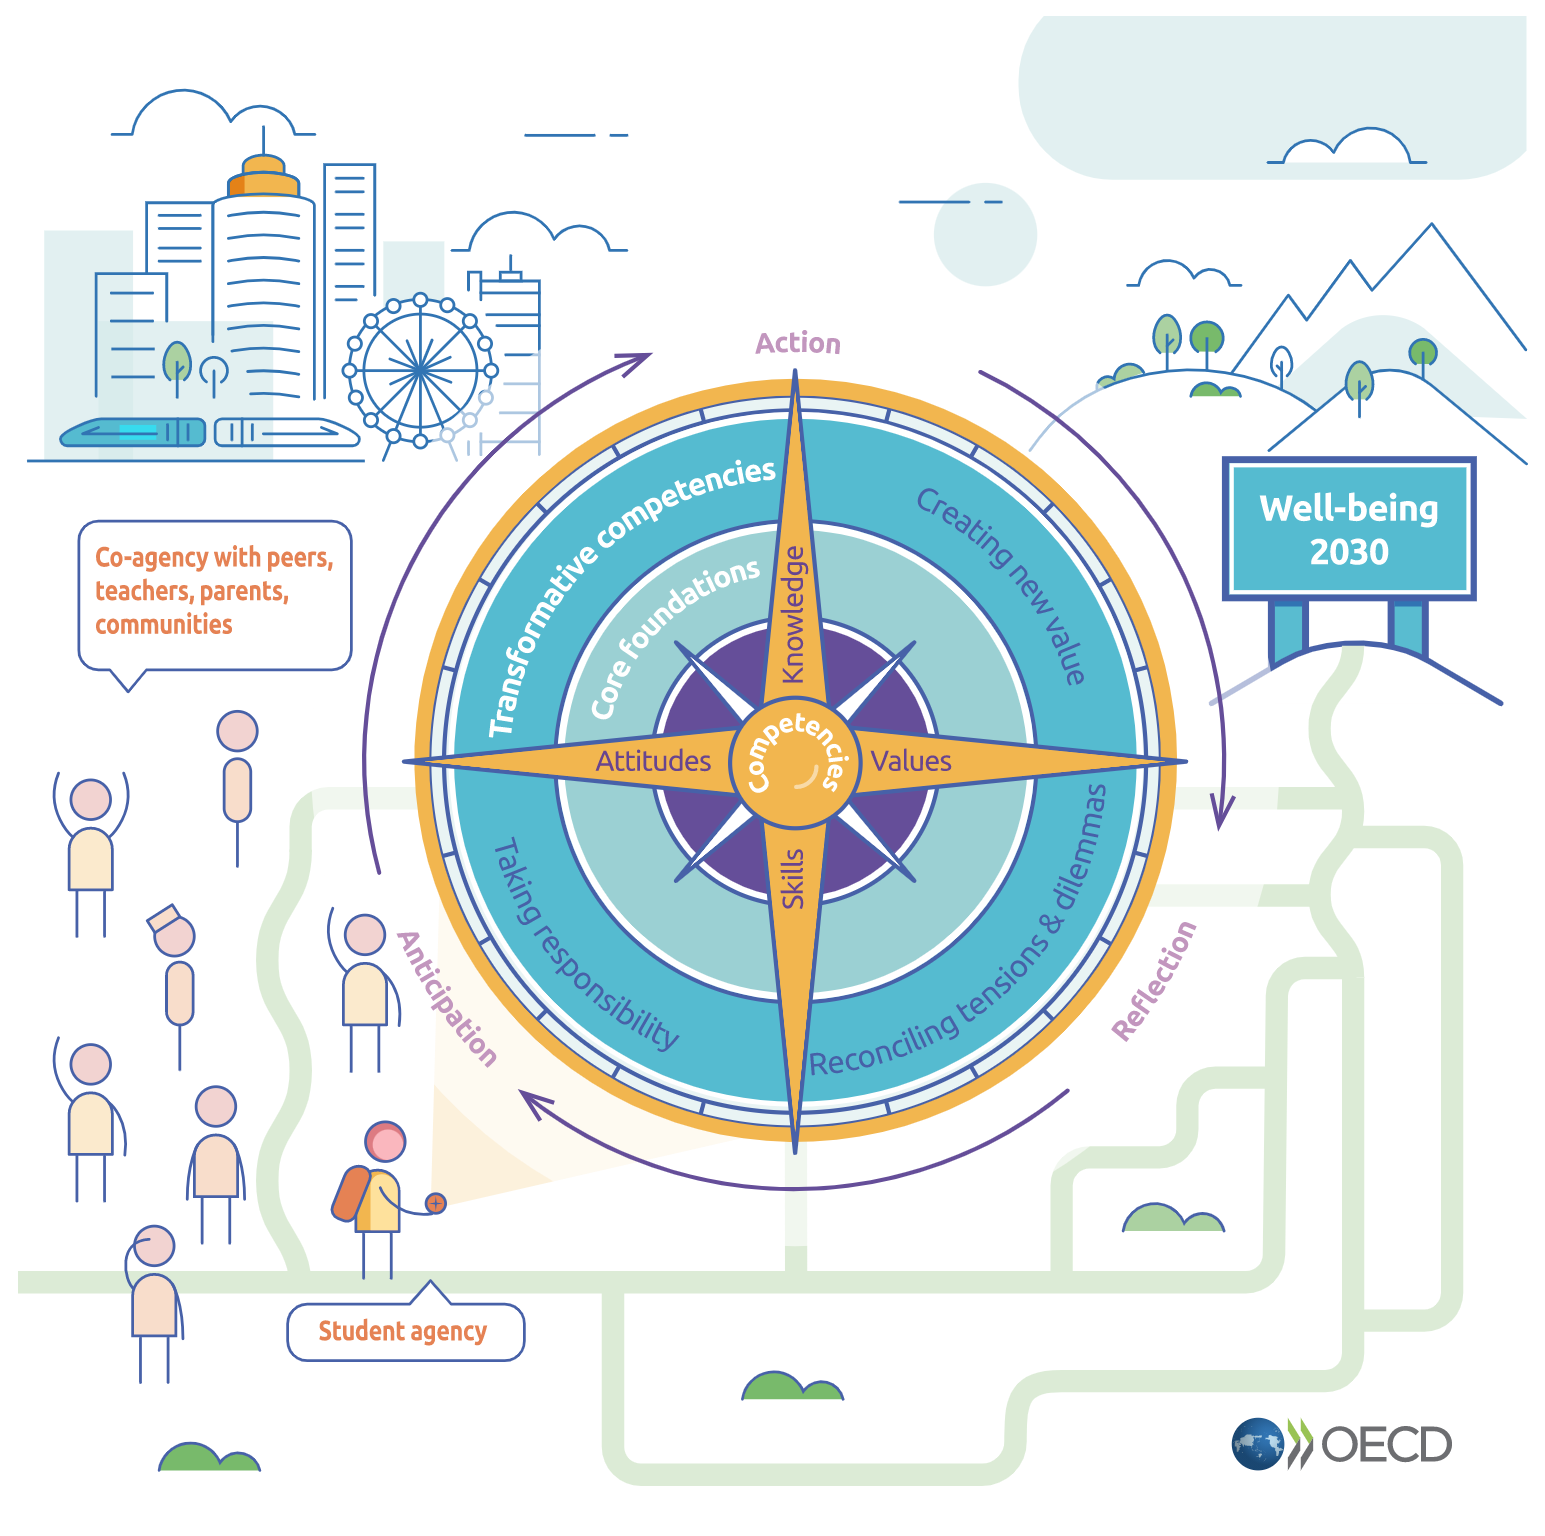 A screenshot of the OECD Learning Compass 2030.